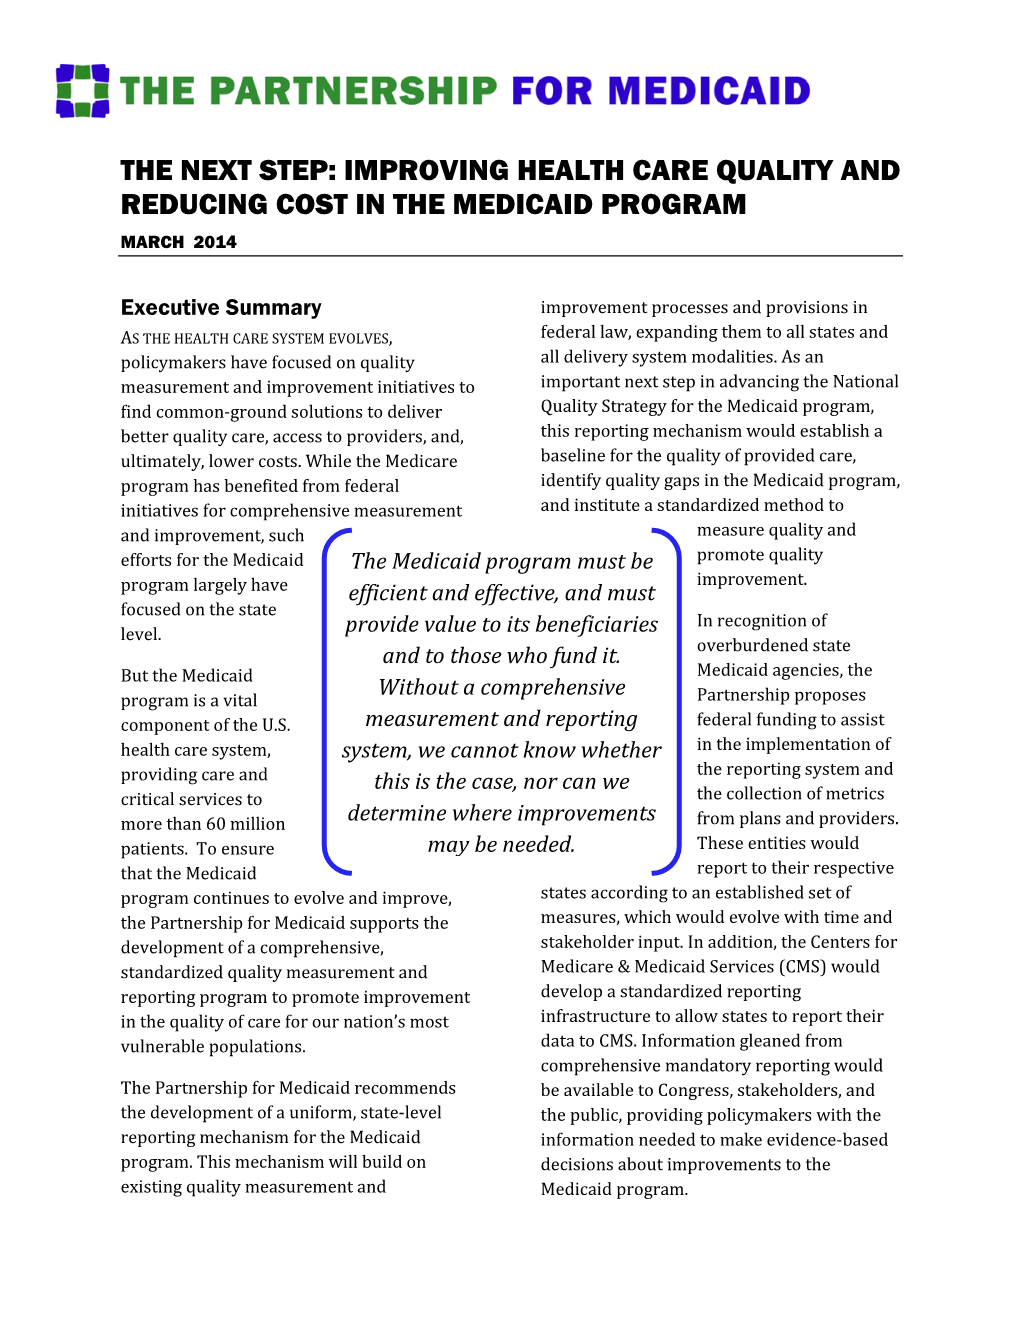 The Next Step: Improving Health Care Quality and Reducing Cost in the Medicaid Program